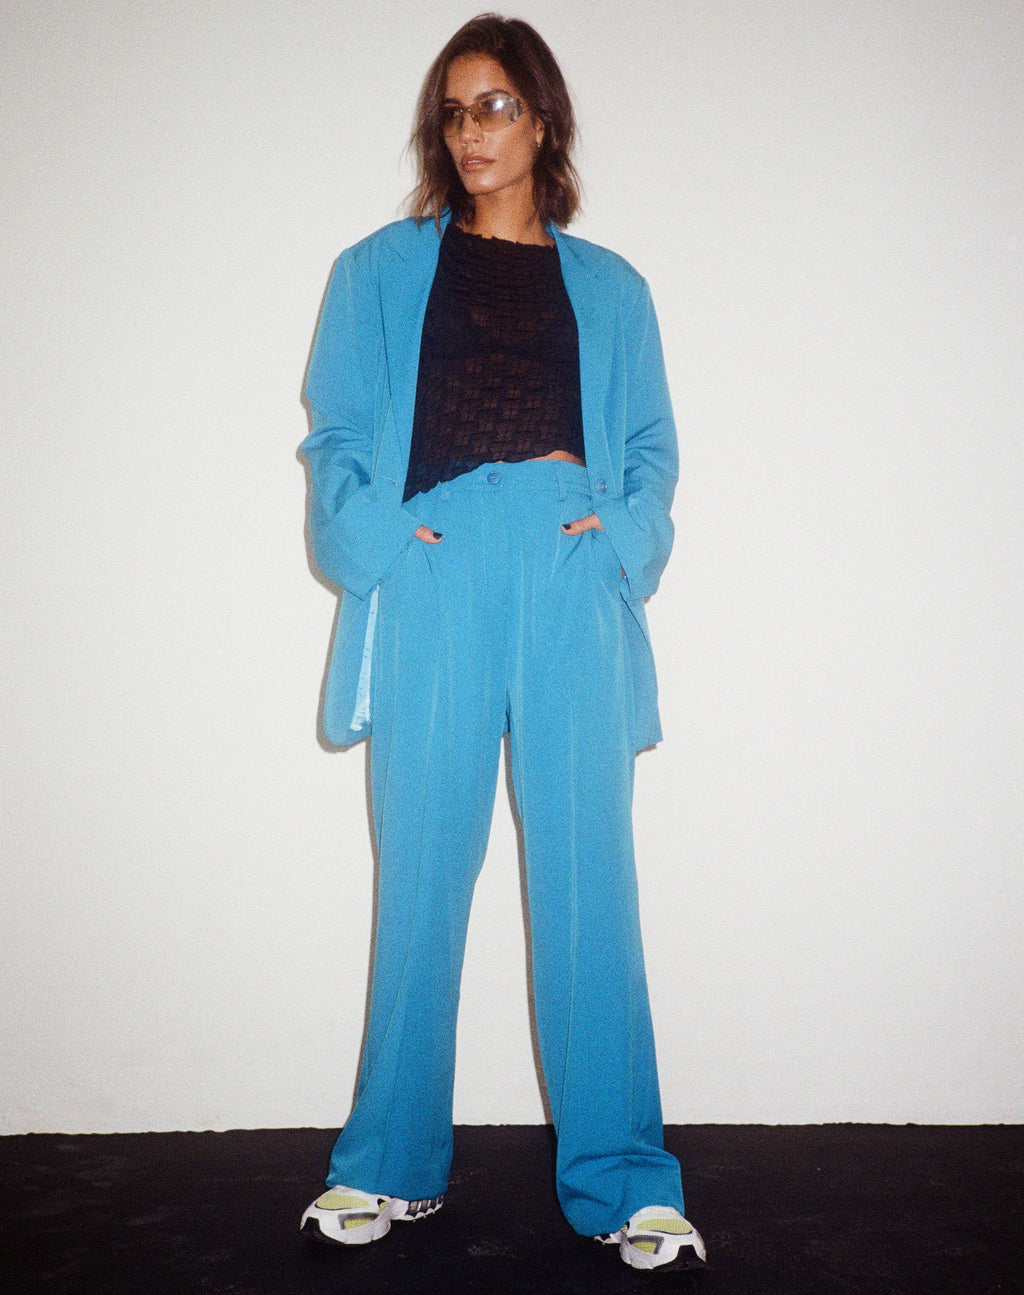 Abba Trouser in Tailoring Blue